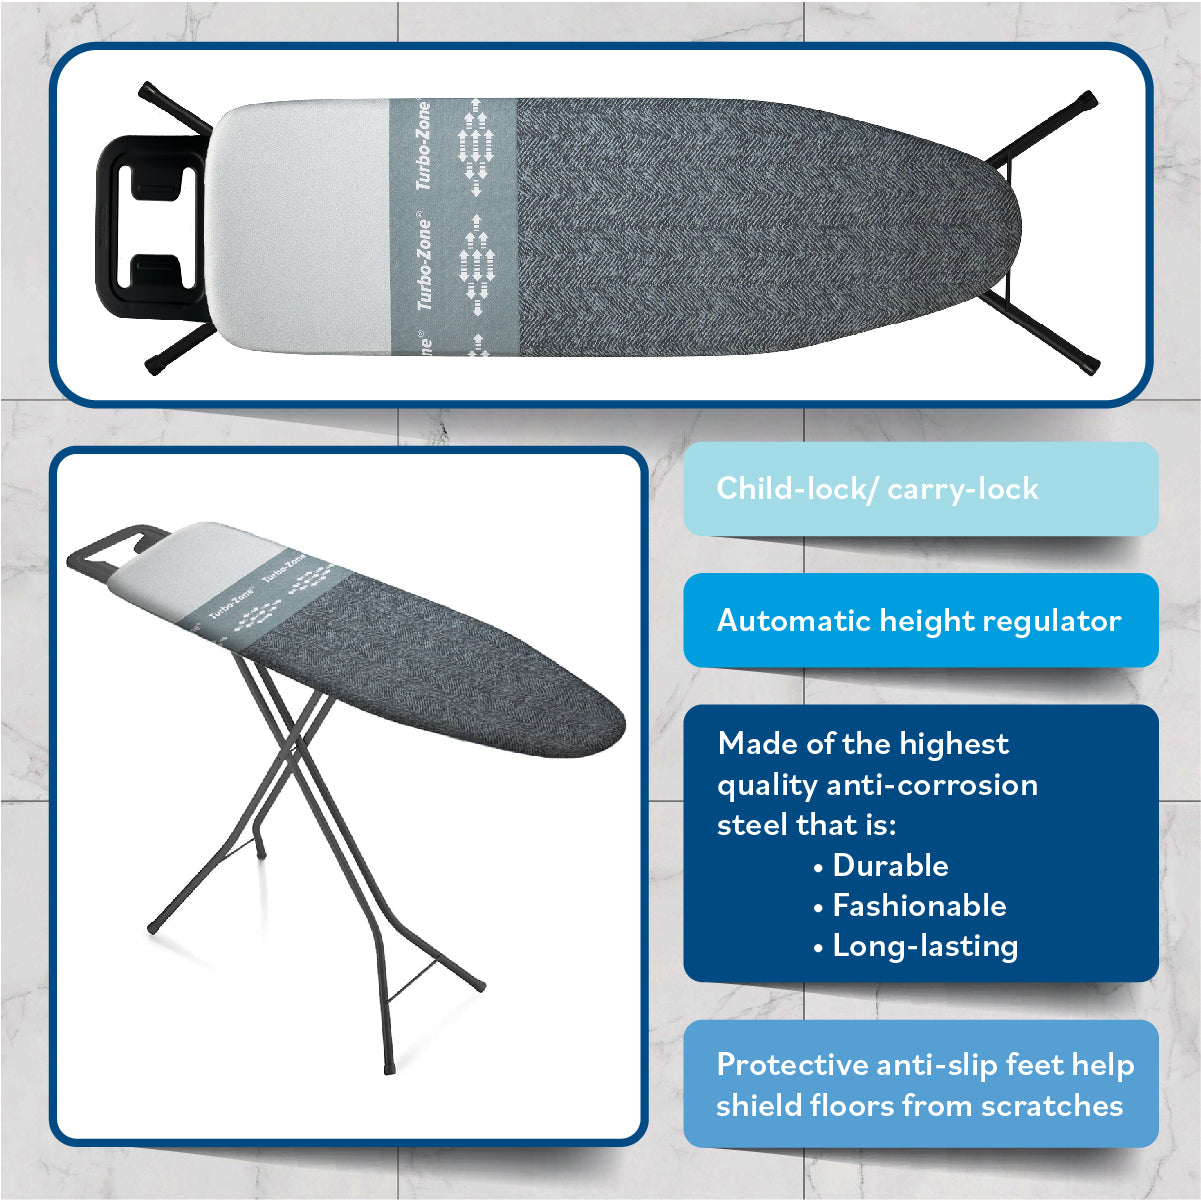 Bartnelli Ironing Board with New Patent Technology | Made in Europe Iron Board with Patent Fast-Glide Turbo & Park Zone, 4 Layer Cover & Pad,Height Adjustable,Safety Iron Rest,4 Premium Steel Legs (BLACK HERRINGBONE)